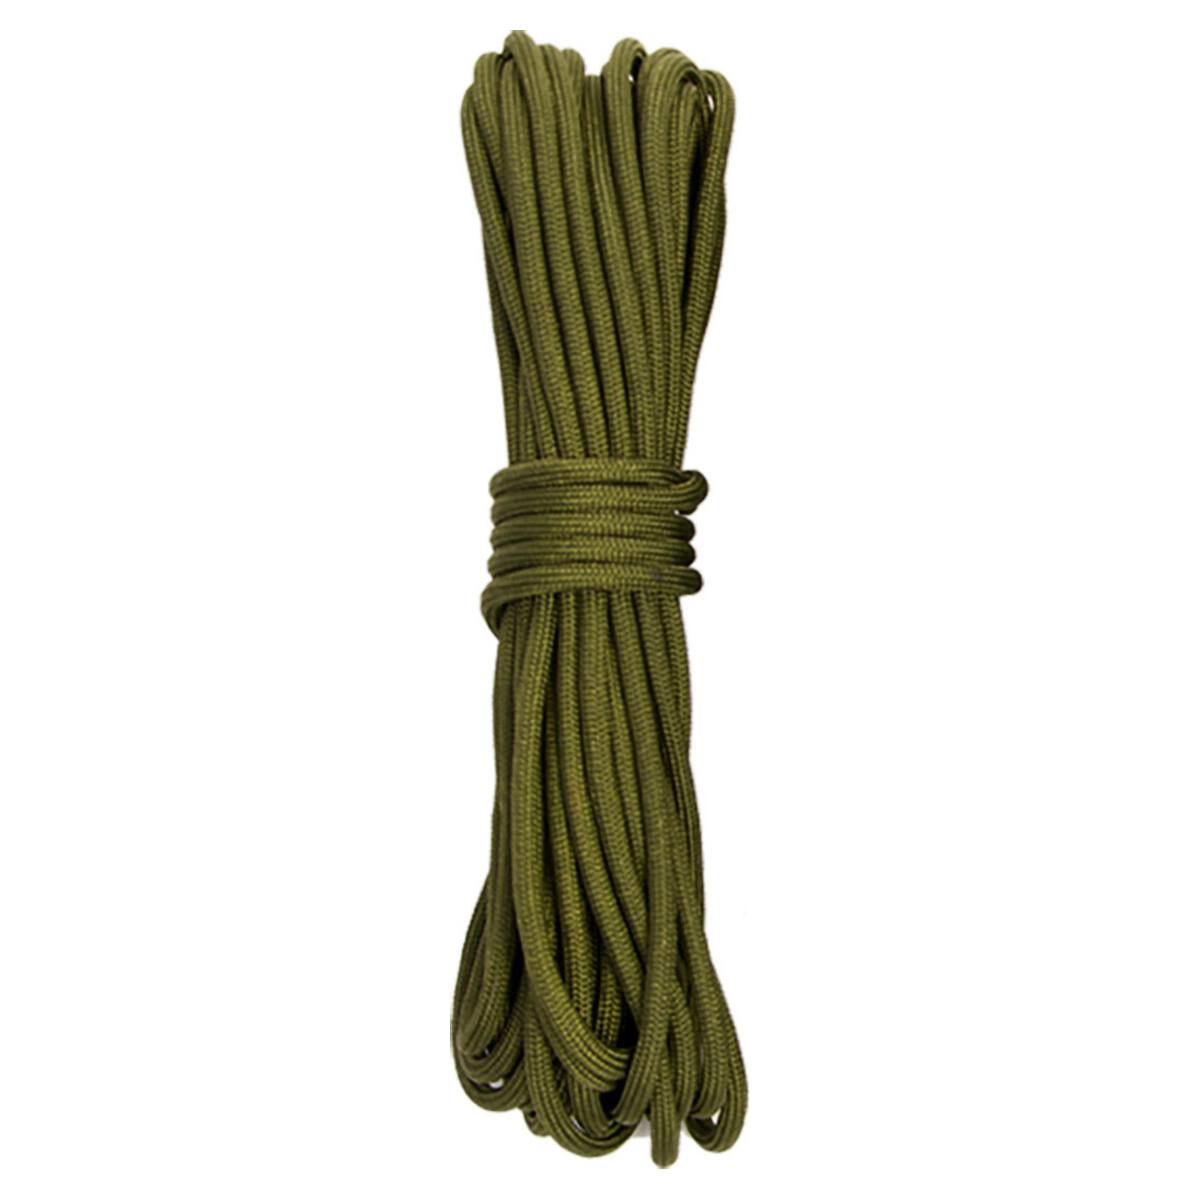  XKDOUS Paracord 750 lb 250ft Black Parachute Cord, 100% Nylon  11 Strand Inner Core Type IV Tactical Paracord Rope, Outside Survival Gear  for Bracelets, Lanyards, Handle Wraps, Camping & Hiking 